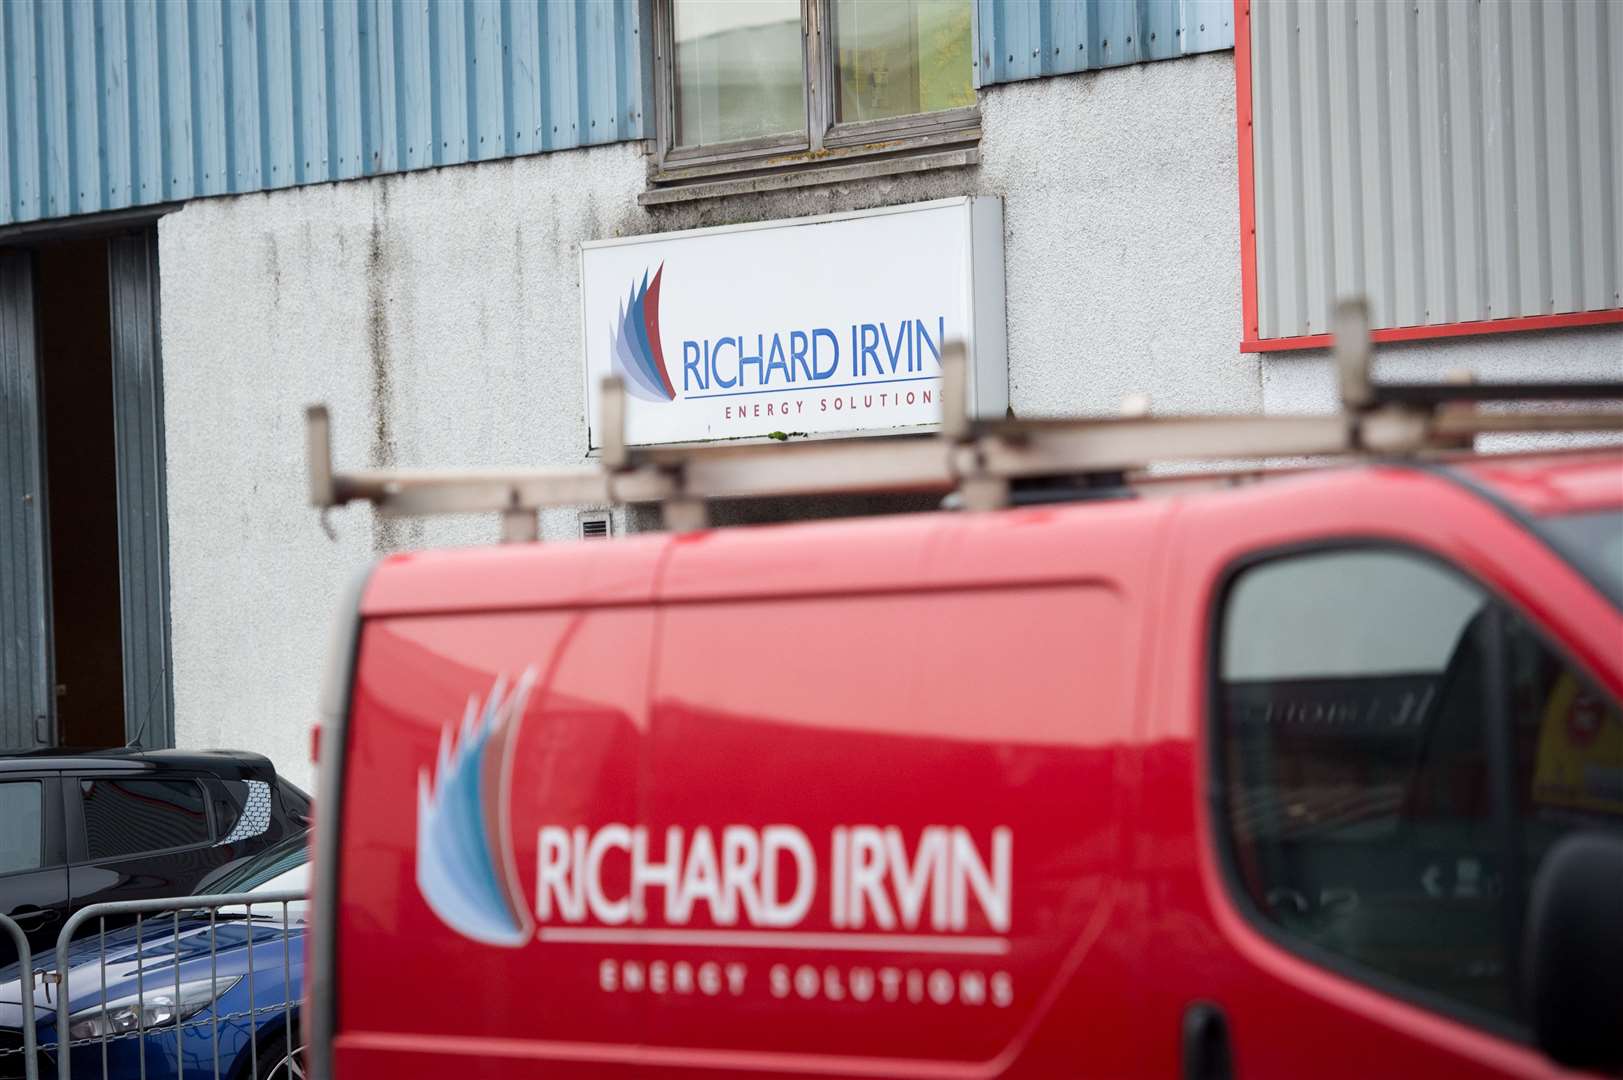 North east group Richard Irvin has raked in huge contracts across the UK.